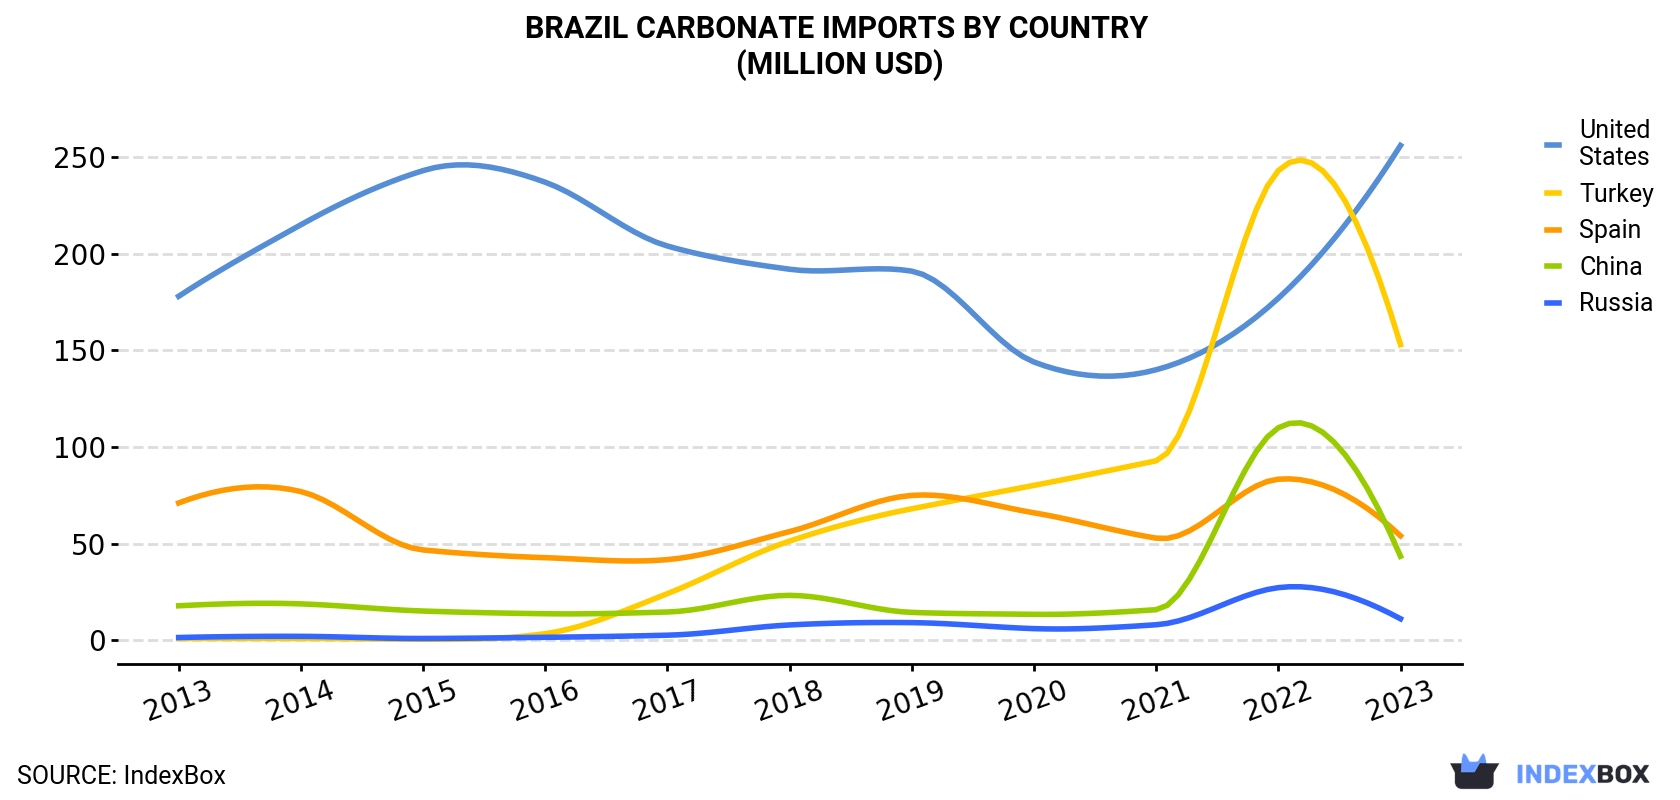 Brazil Carbonate Imports By Country (Million USD)